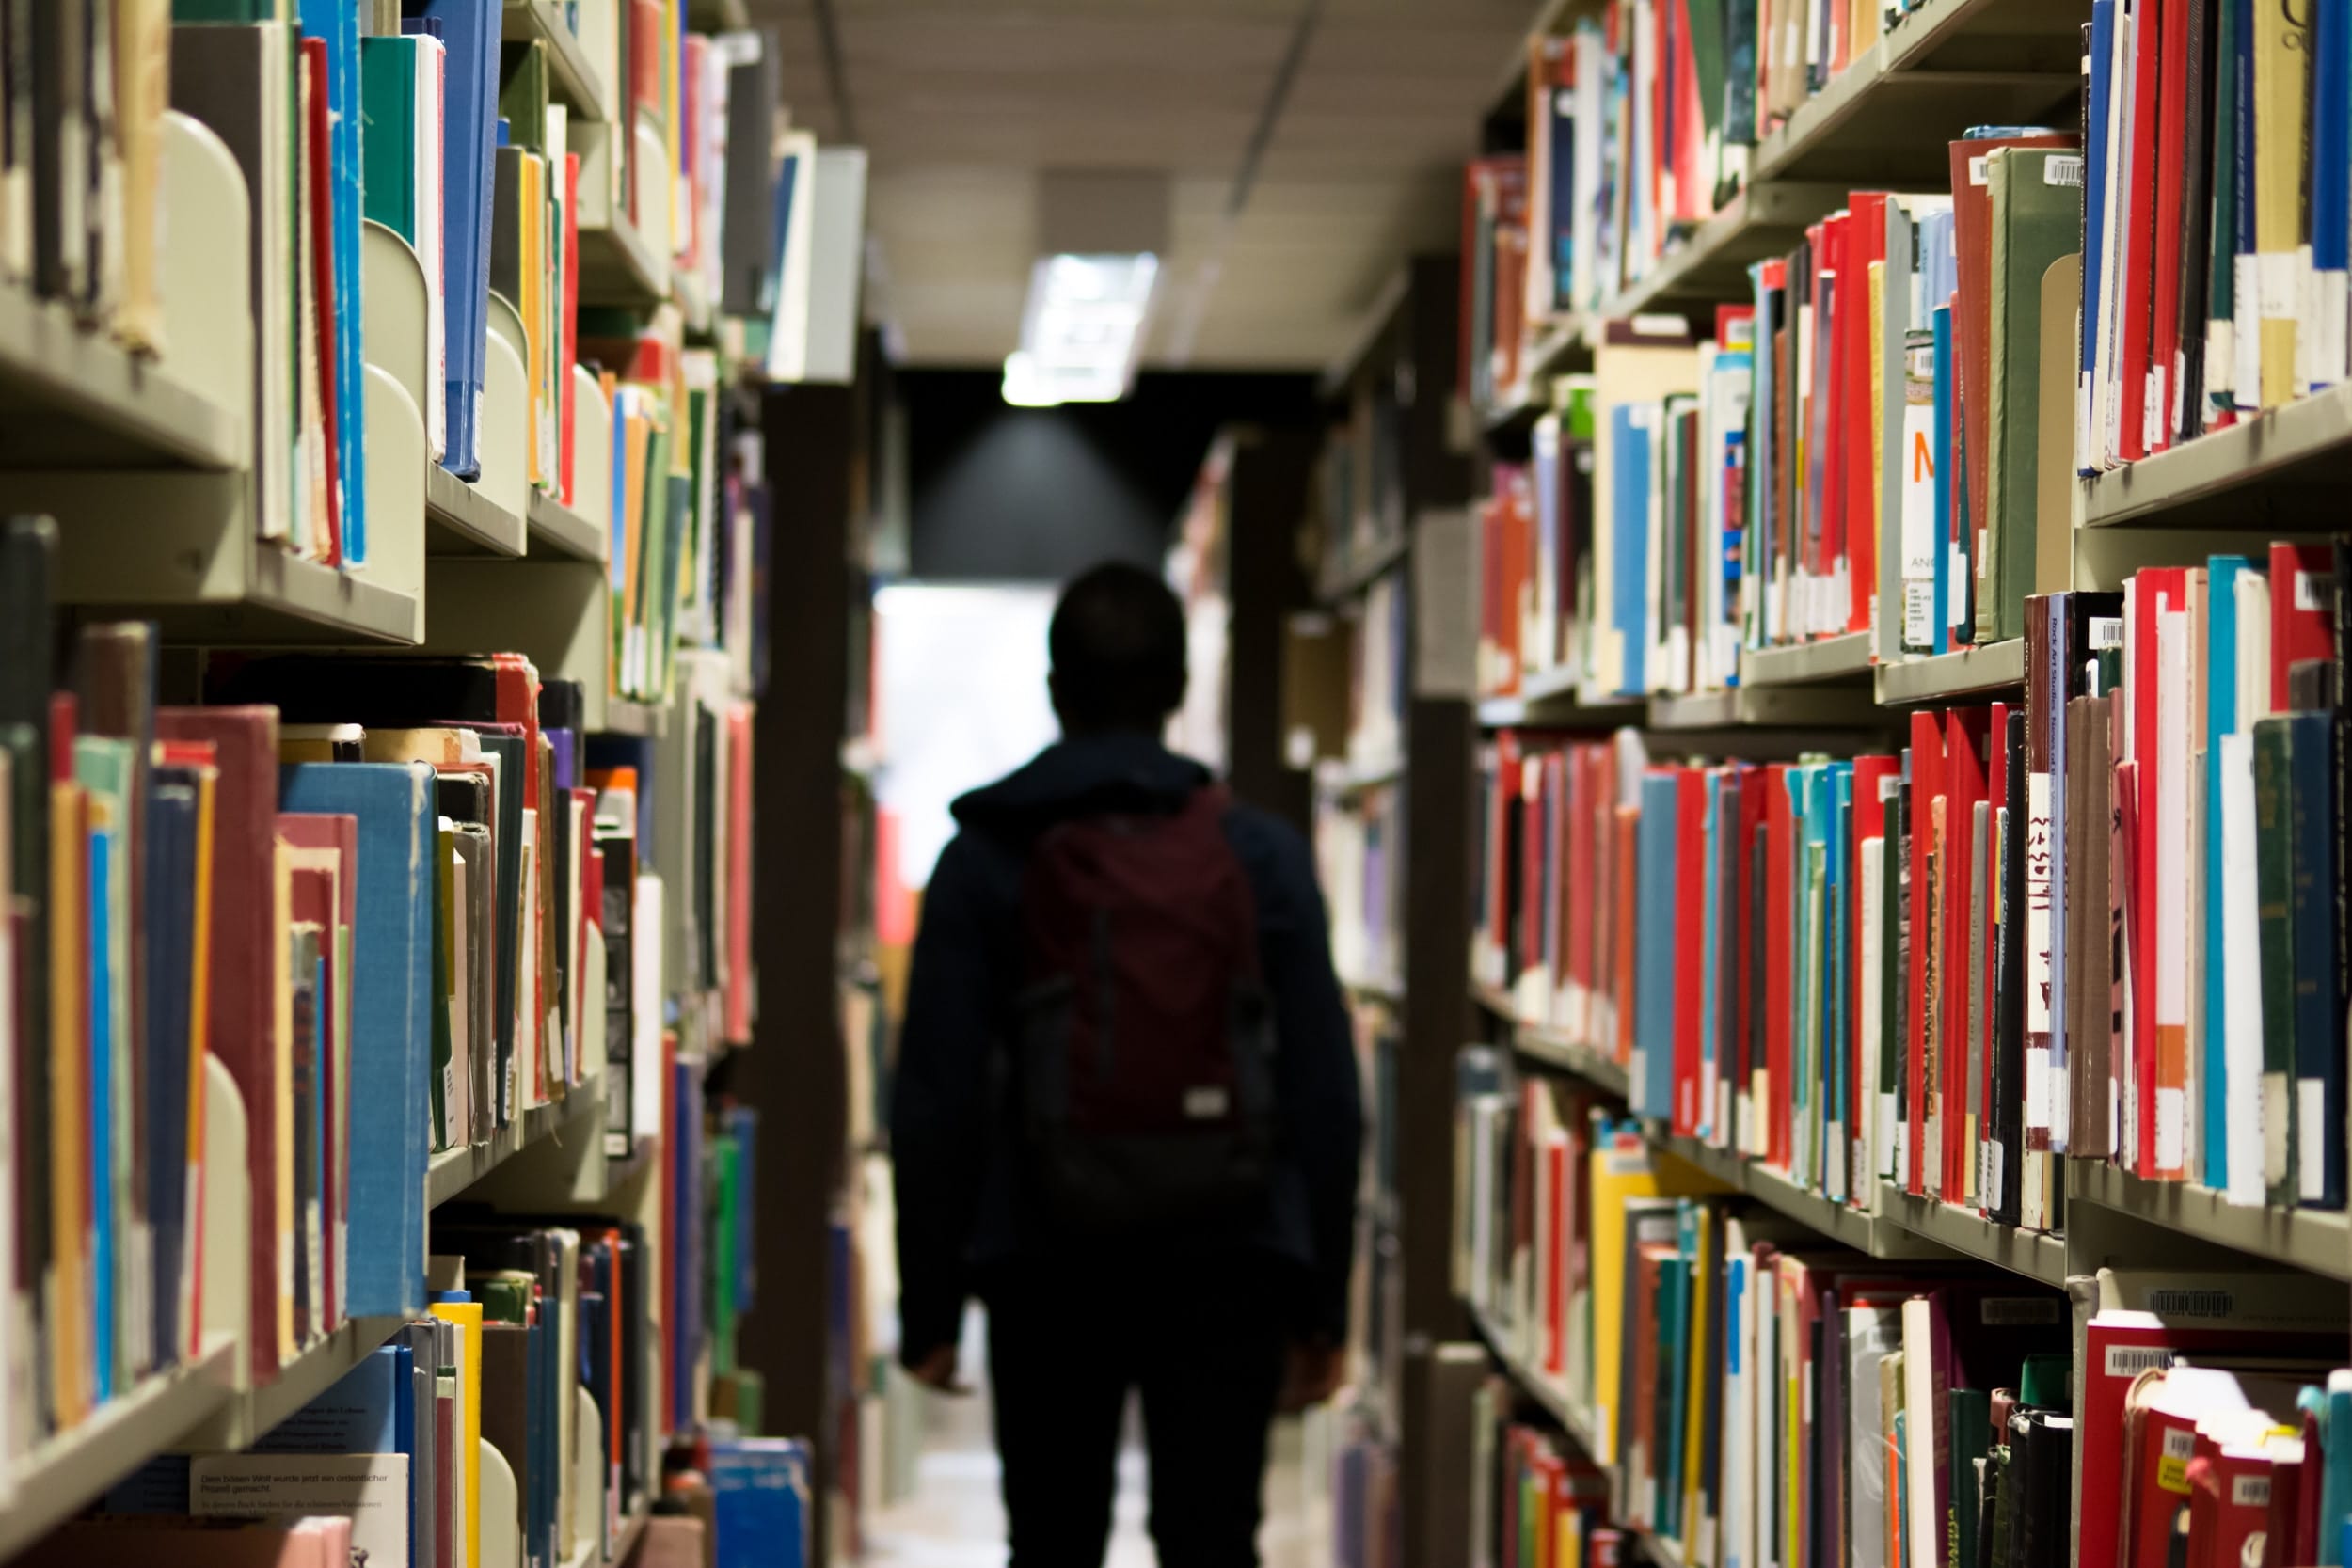 Male student with backpack walking between library shelves; image by Bantersnaps, via Unsplash.com.